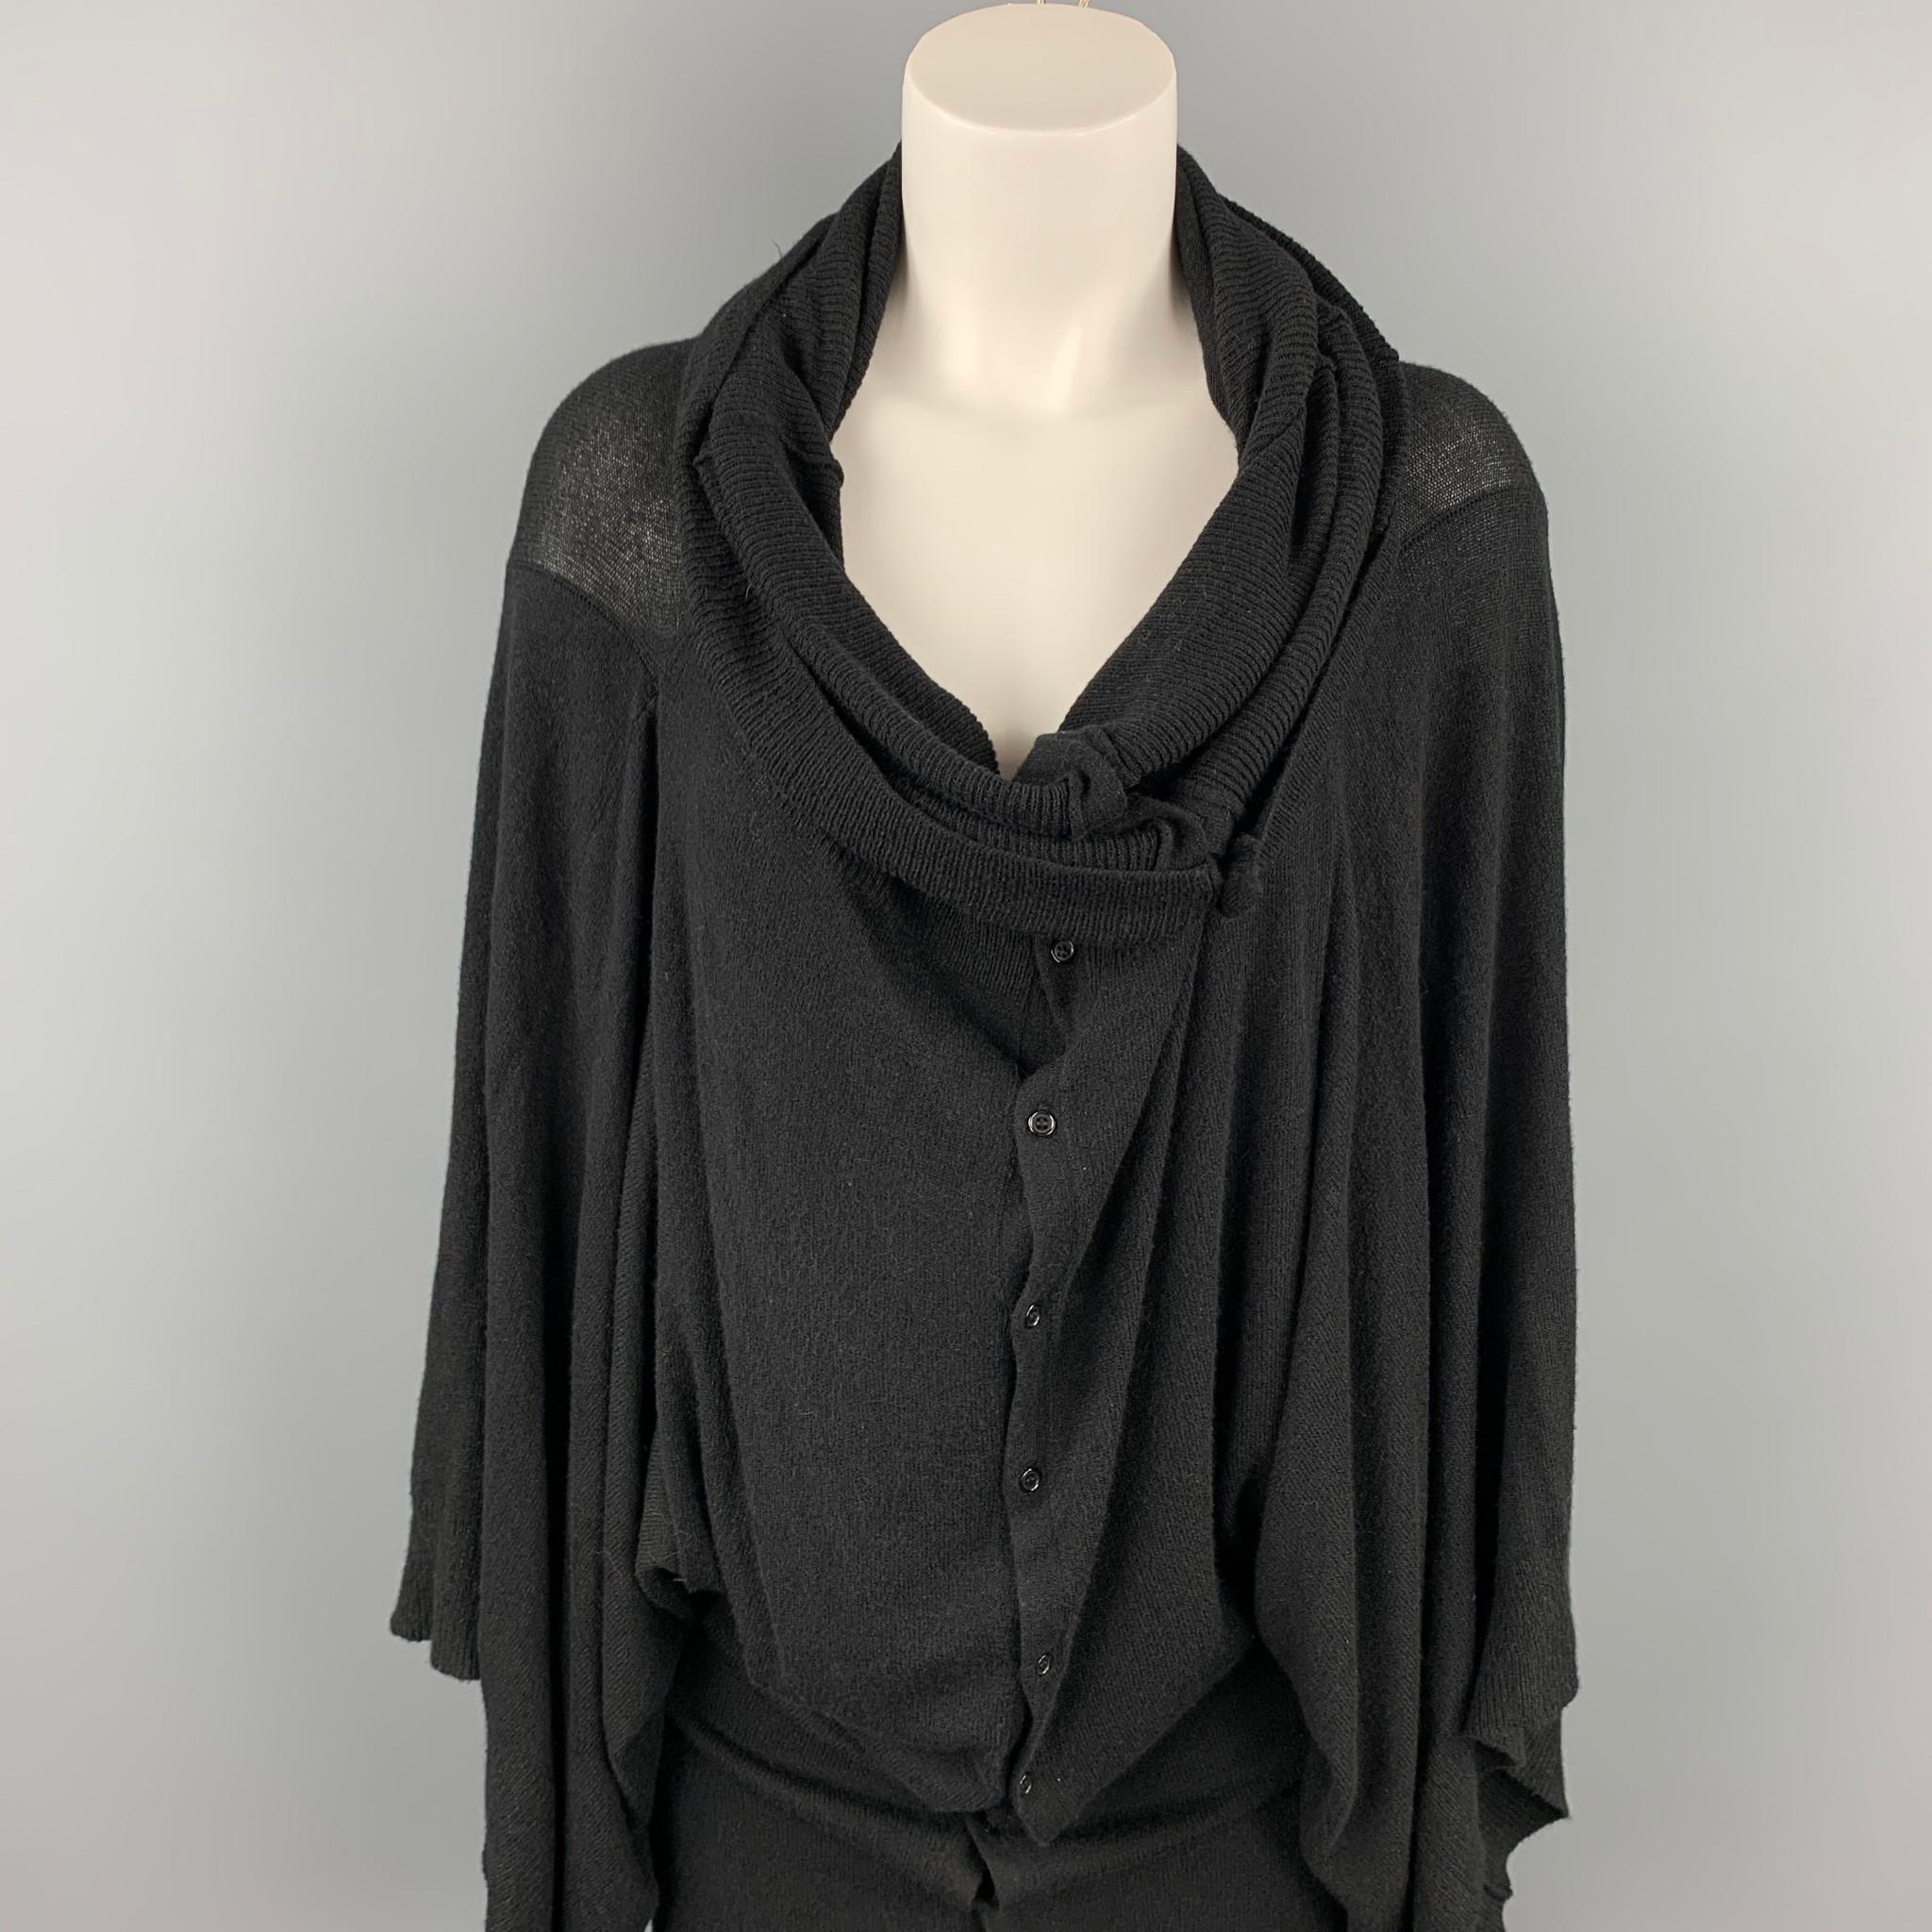 A.F. VANDERVORST cardigan comes in a black knitted viscose / polyester featuring a oversized style and a buttoned closure. Made in Belgium.

Very Good Pre-Owned Condition.
Marked: S

Measurements:

Shoulder: 20 in.
Bust: 38 in.
Sleeve: 21.5